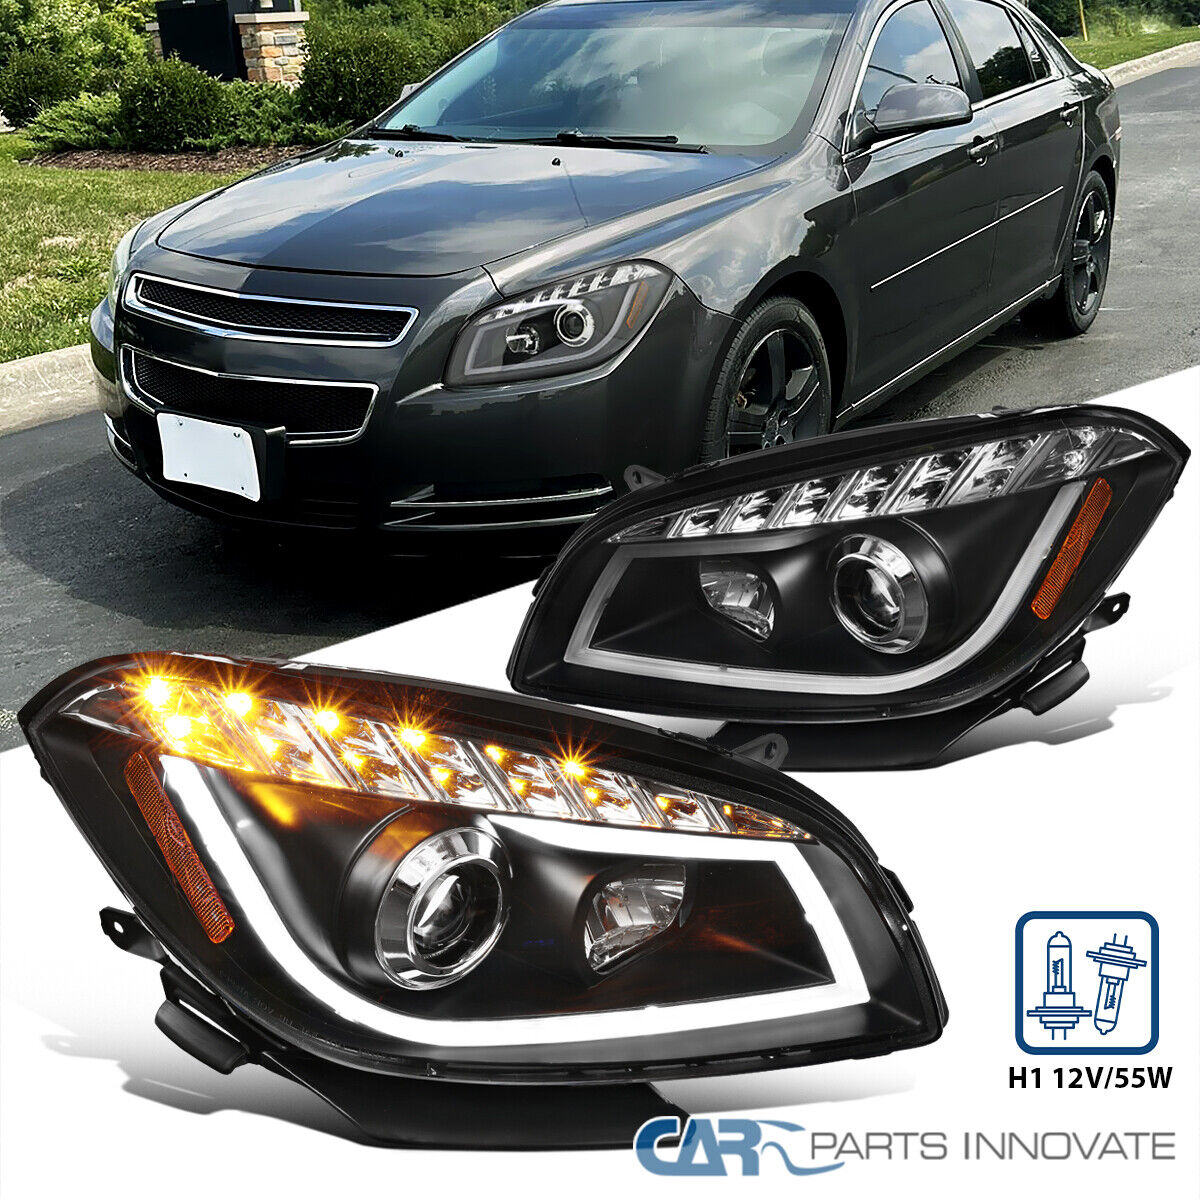 Black Fits 2008-2012 Chevy Malibu LED Strip Projector Headlights Lamp Left+Right